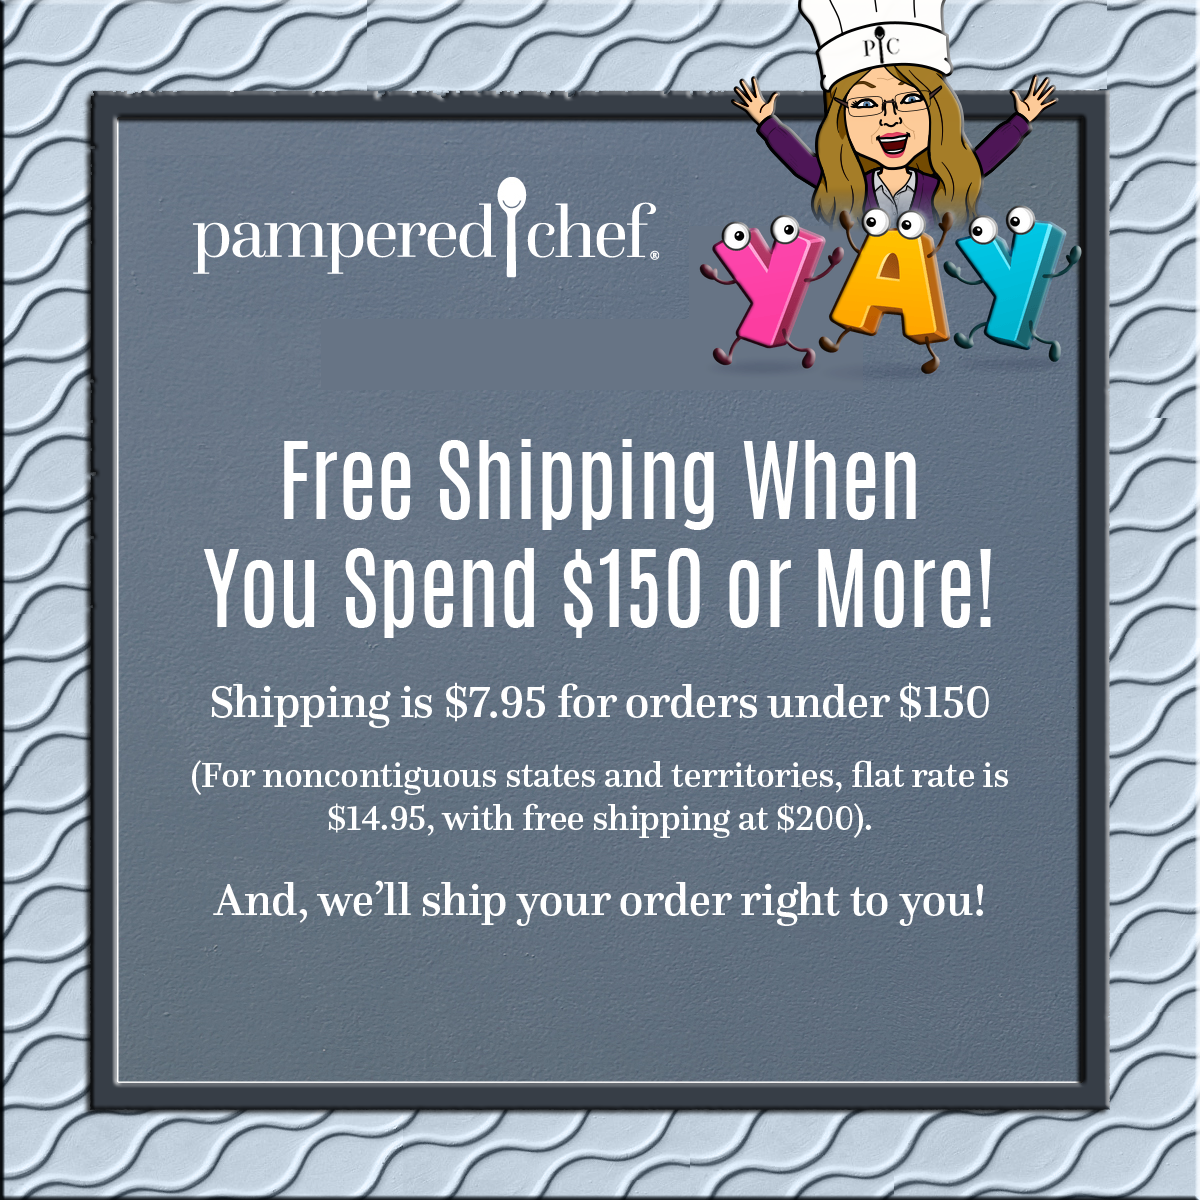 Guests who spend $150 or more will receive free shipping!